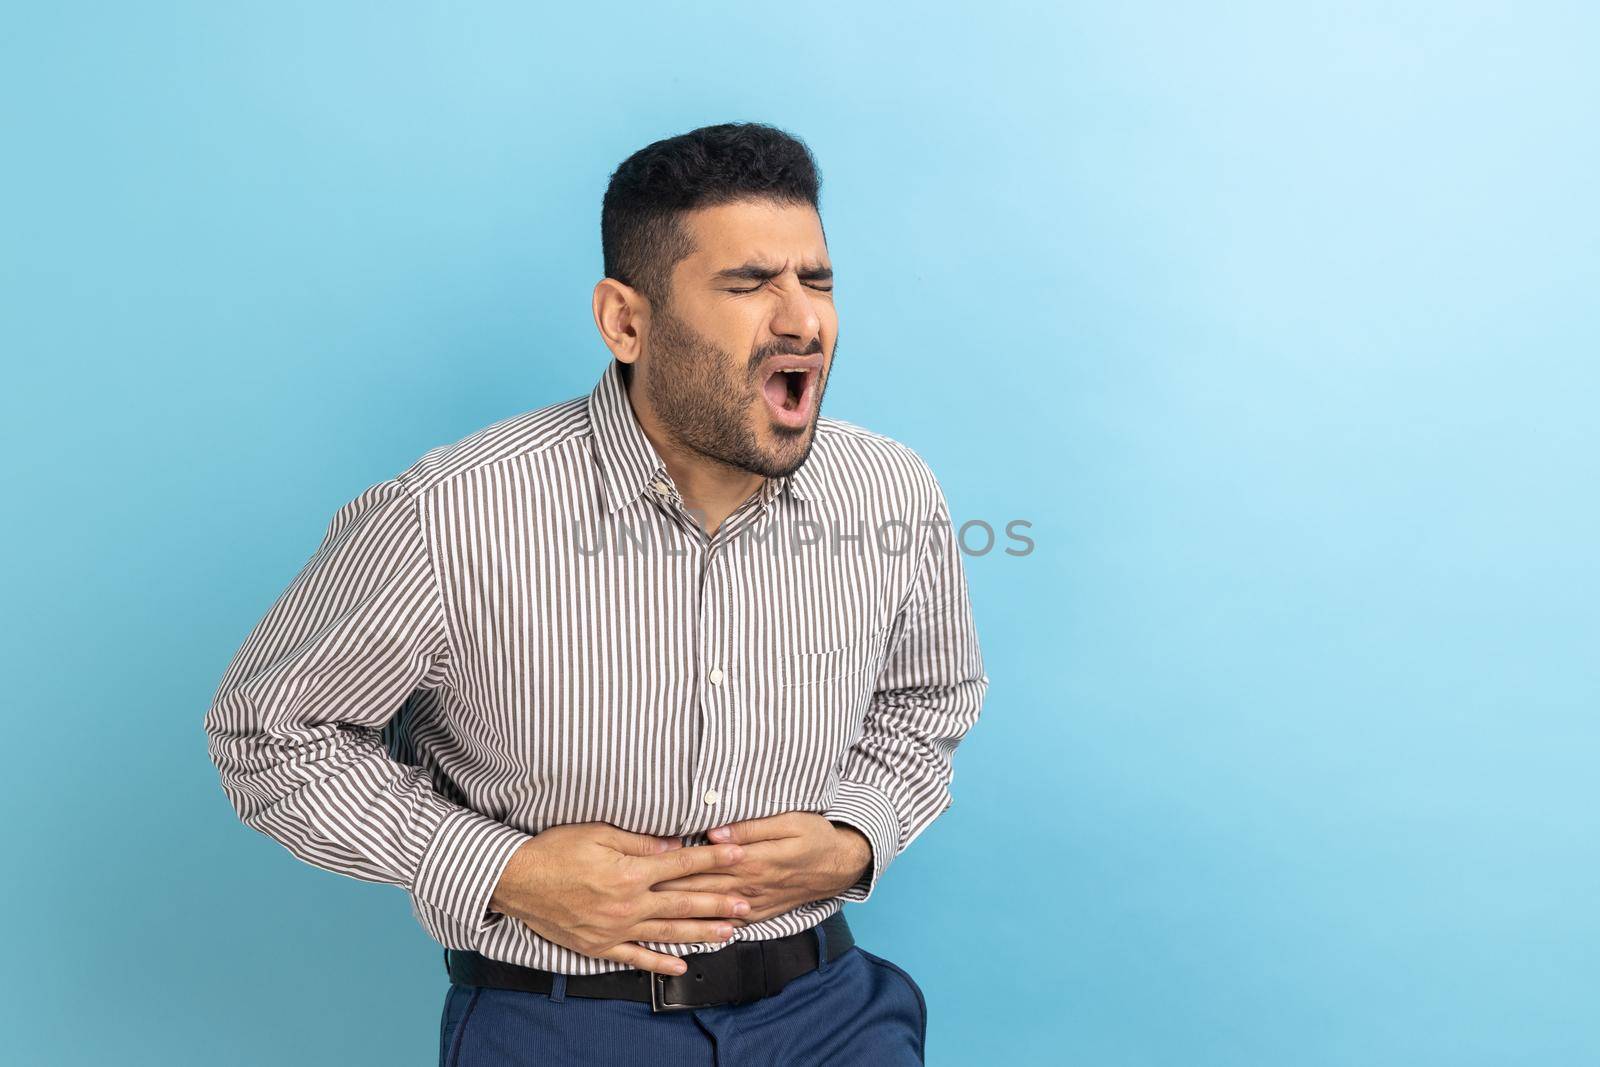 Portrait of sick bearded businessman hunching and grimacing from strong stomach ache, having indigestion or diarrhea symptoms, wearing striped shirt. Indoor studio shot isolated on blue background.